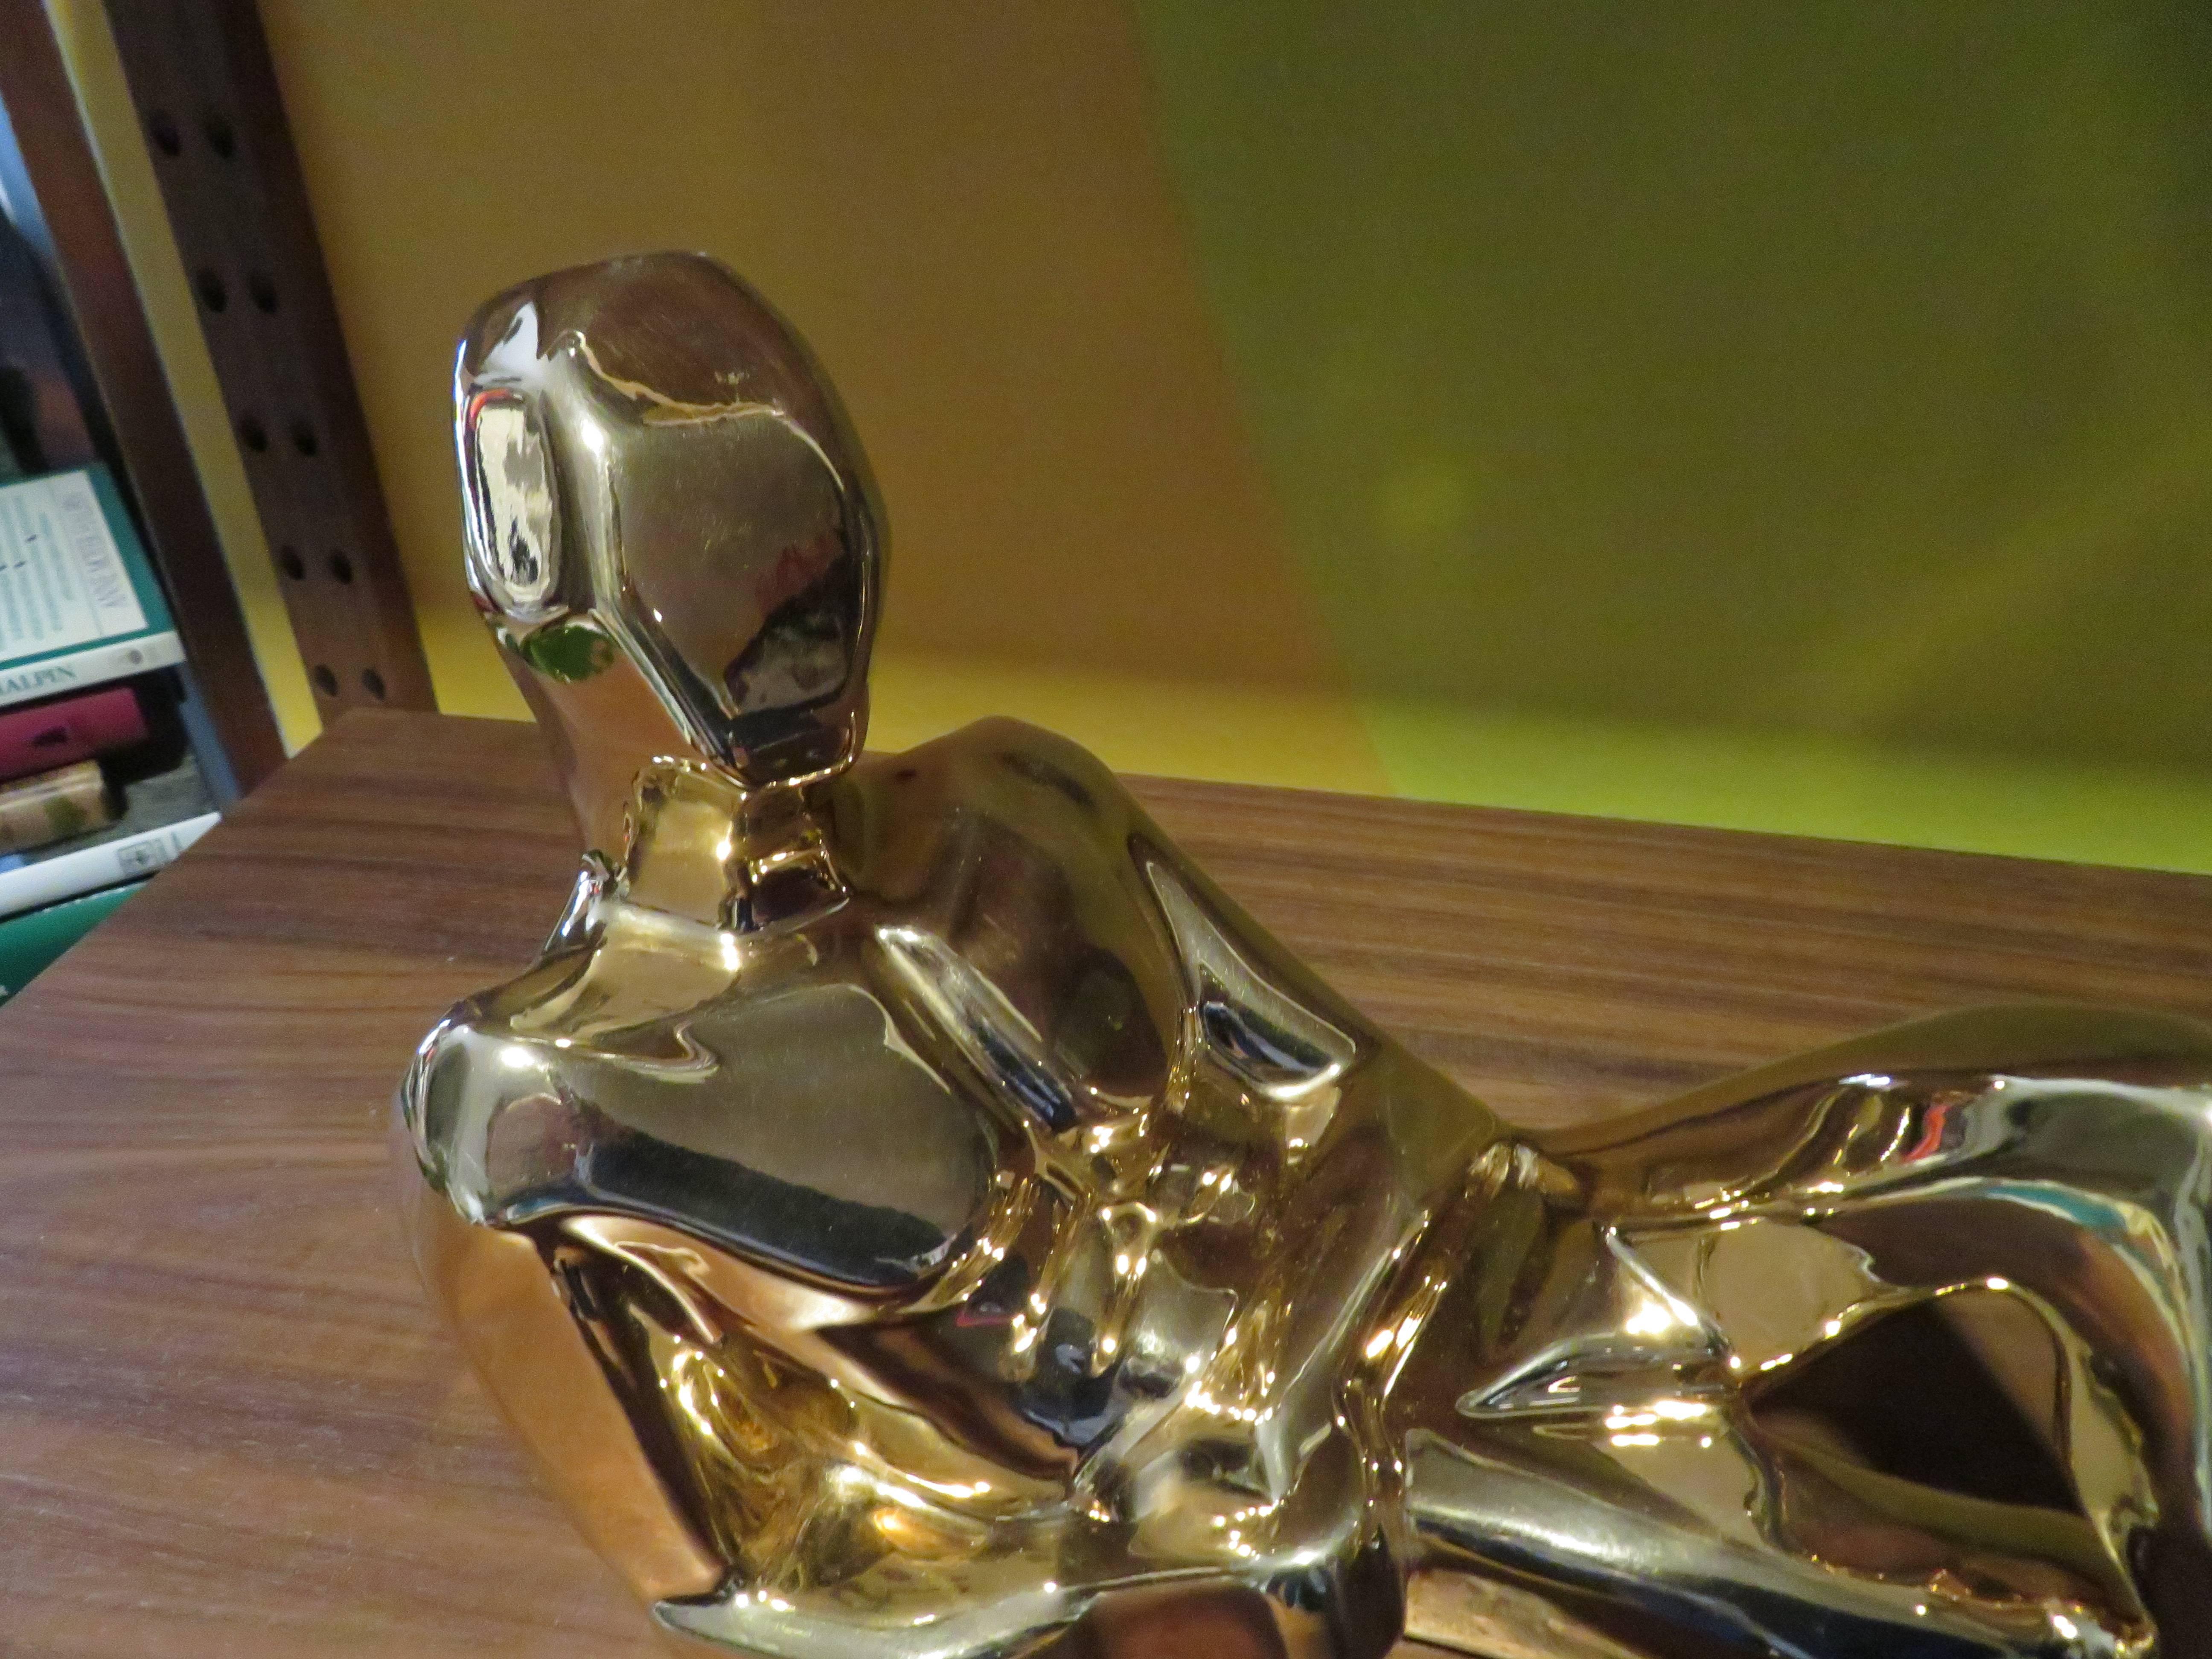 A chic Mid-Century Modernist figurative sculpture in plated gold by Jaru of California. This example depicts a reclining man in repose. The artist's nod to Cubism is apparent here as is a very slick, modern style. A lovely sculpture for any space.